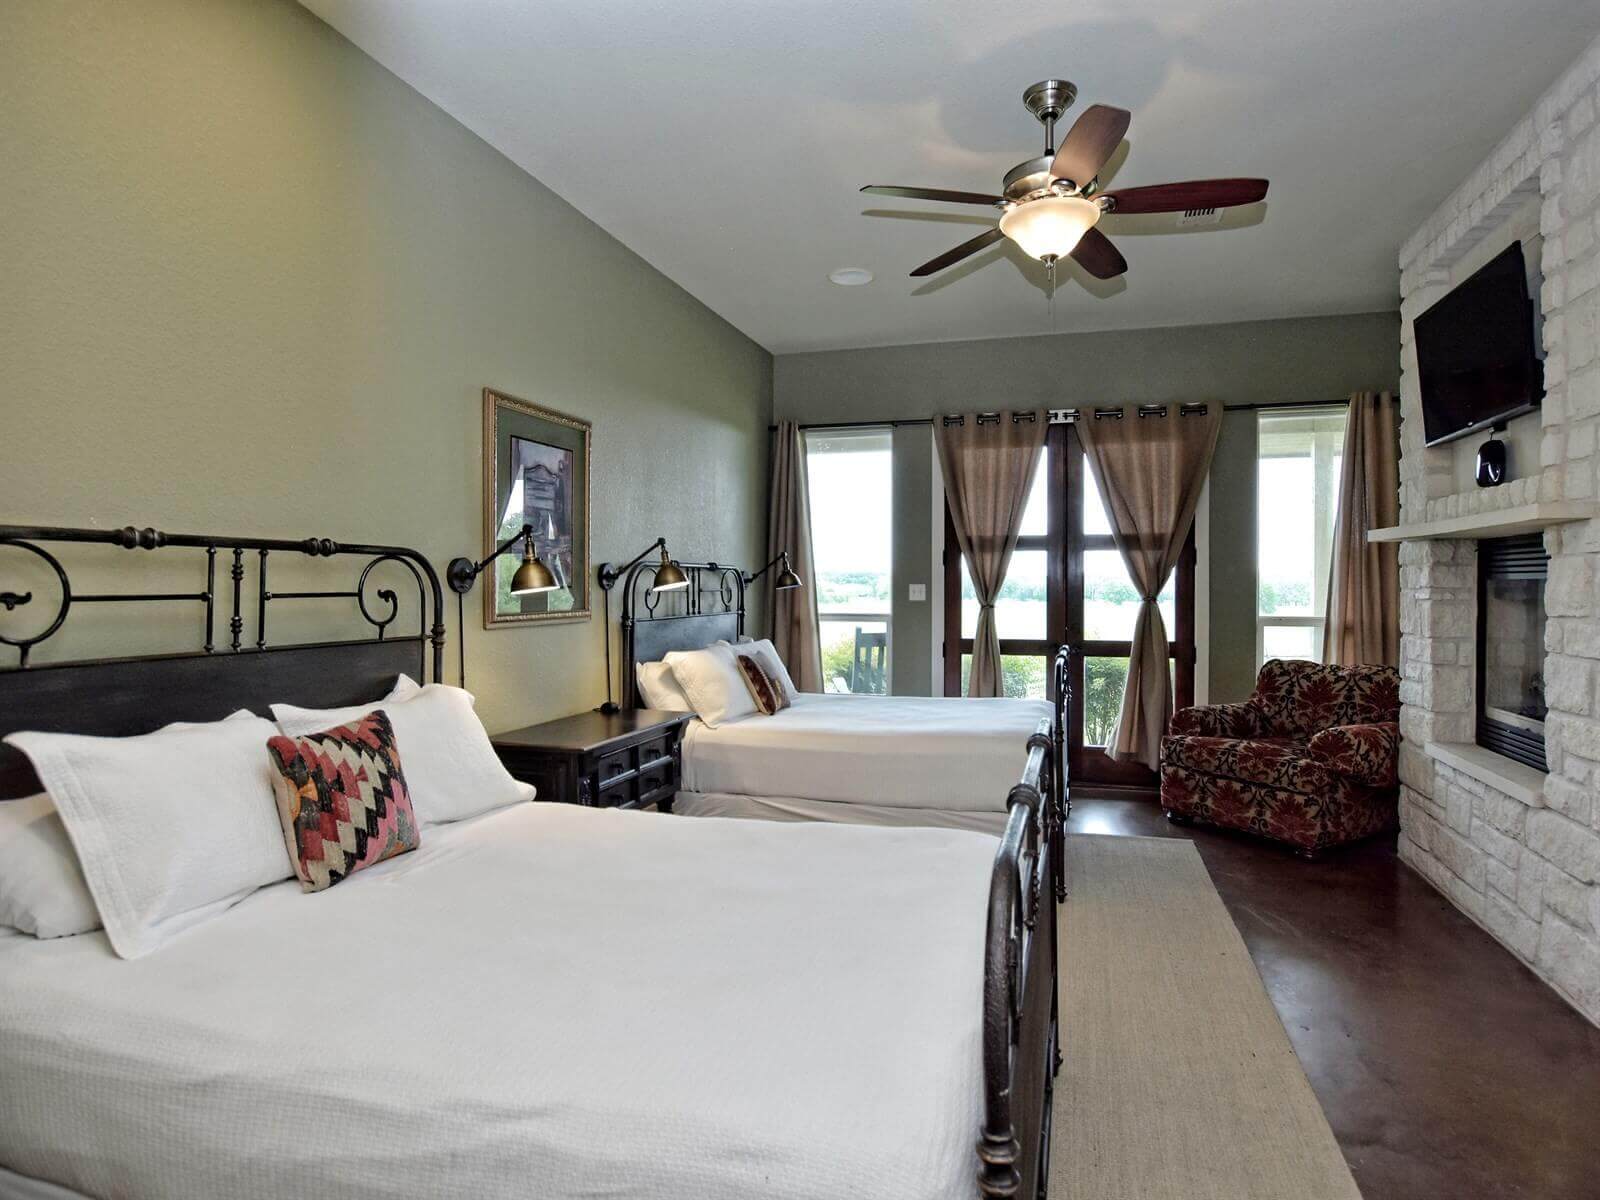 Pecan River Ranch Accommodations - Master Bedroom View